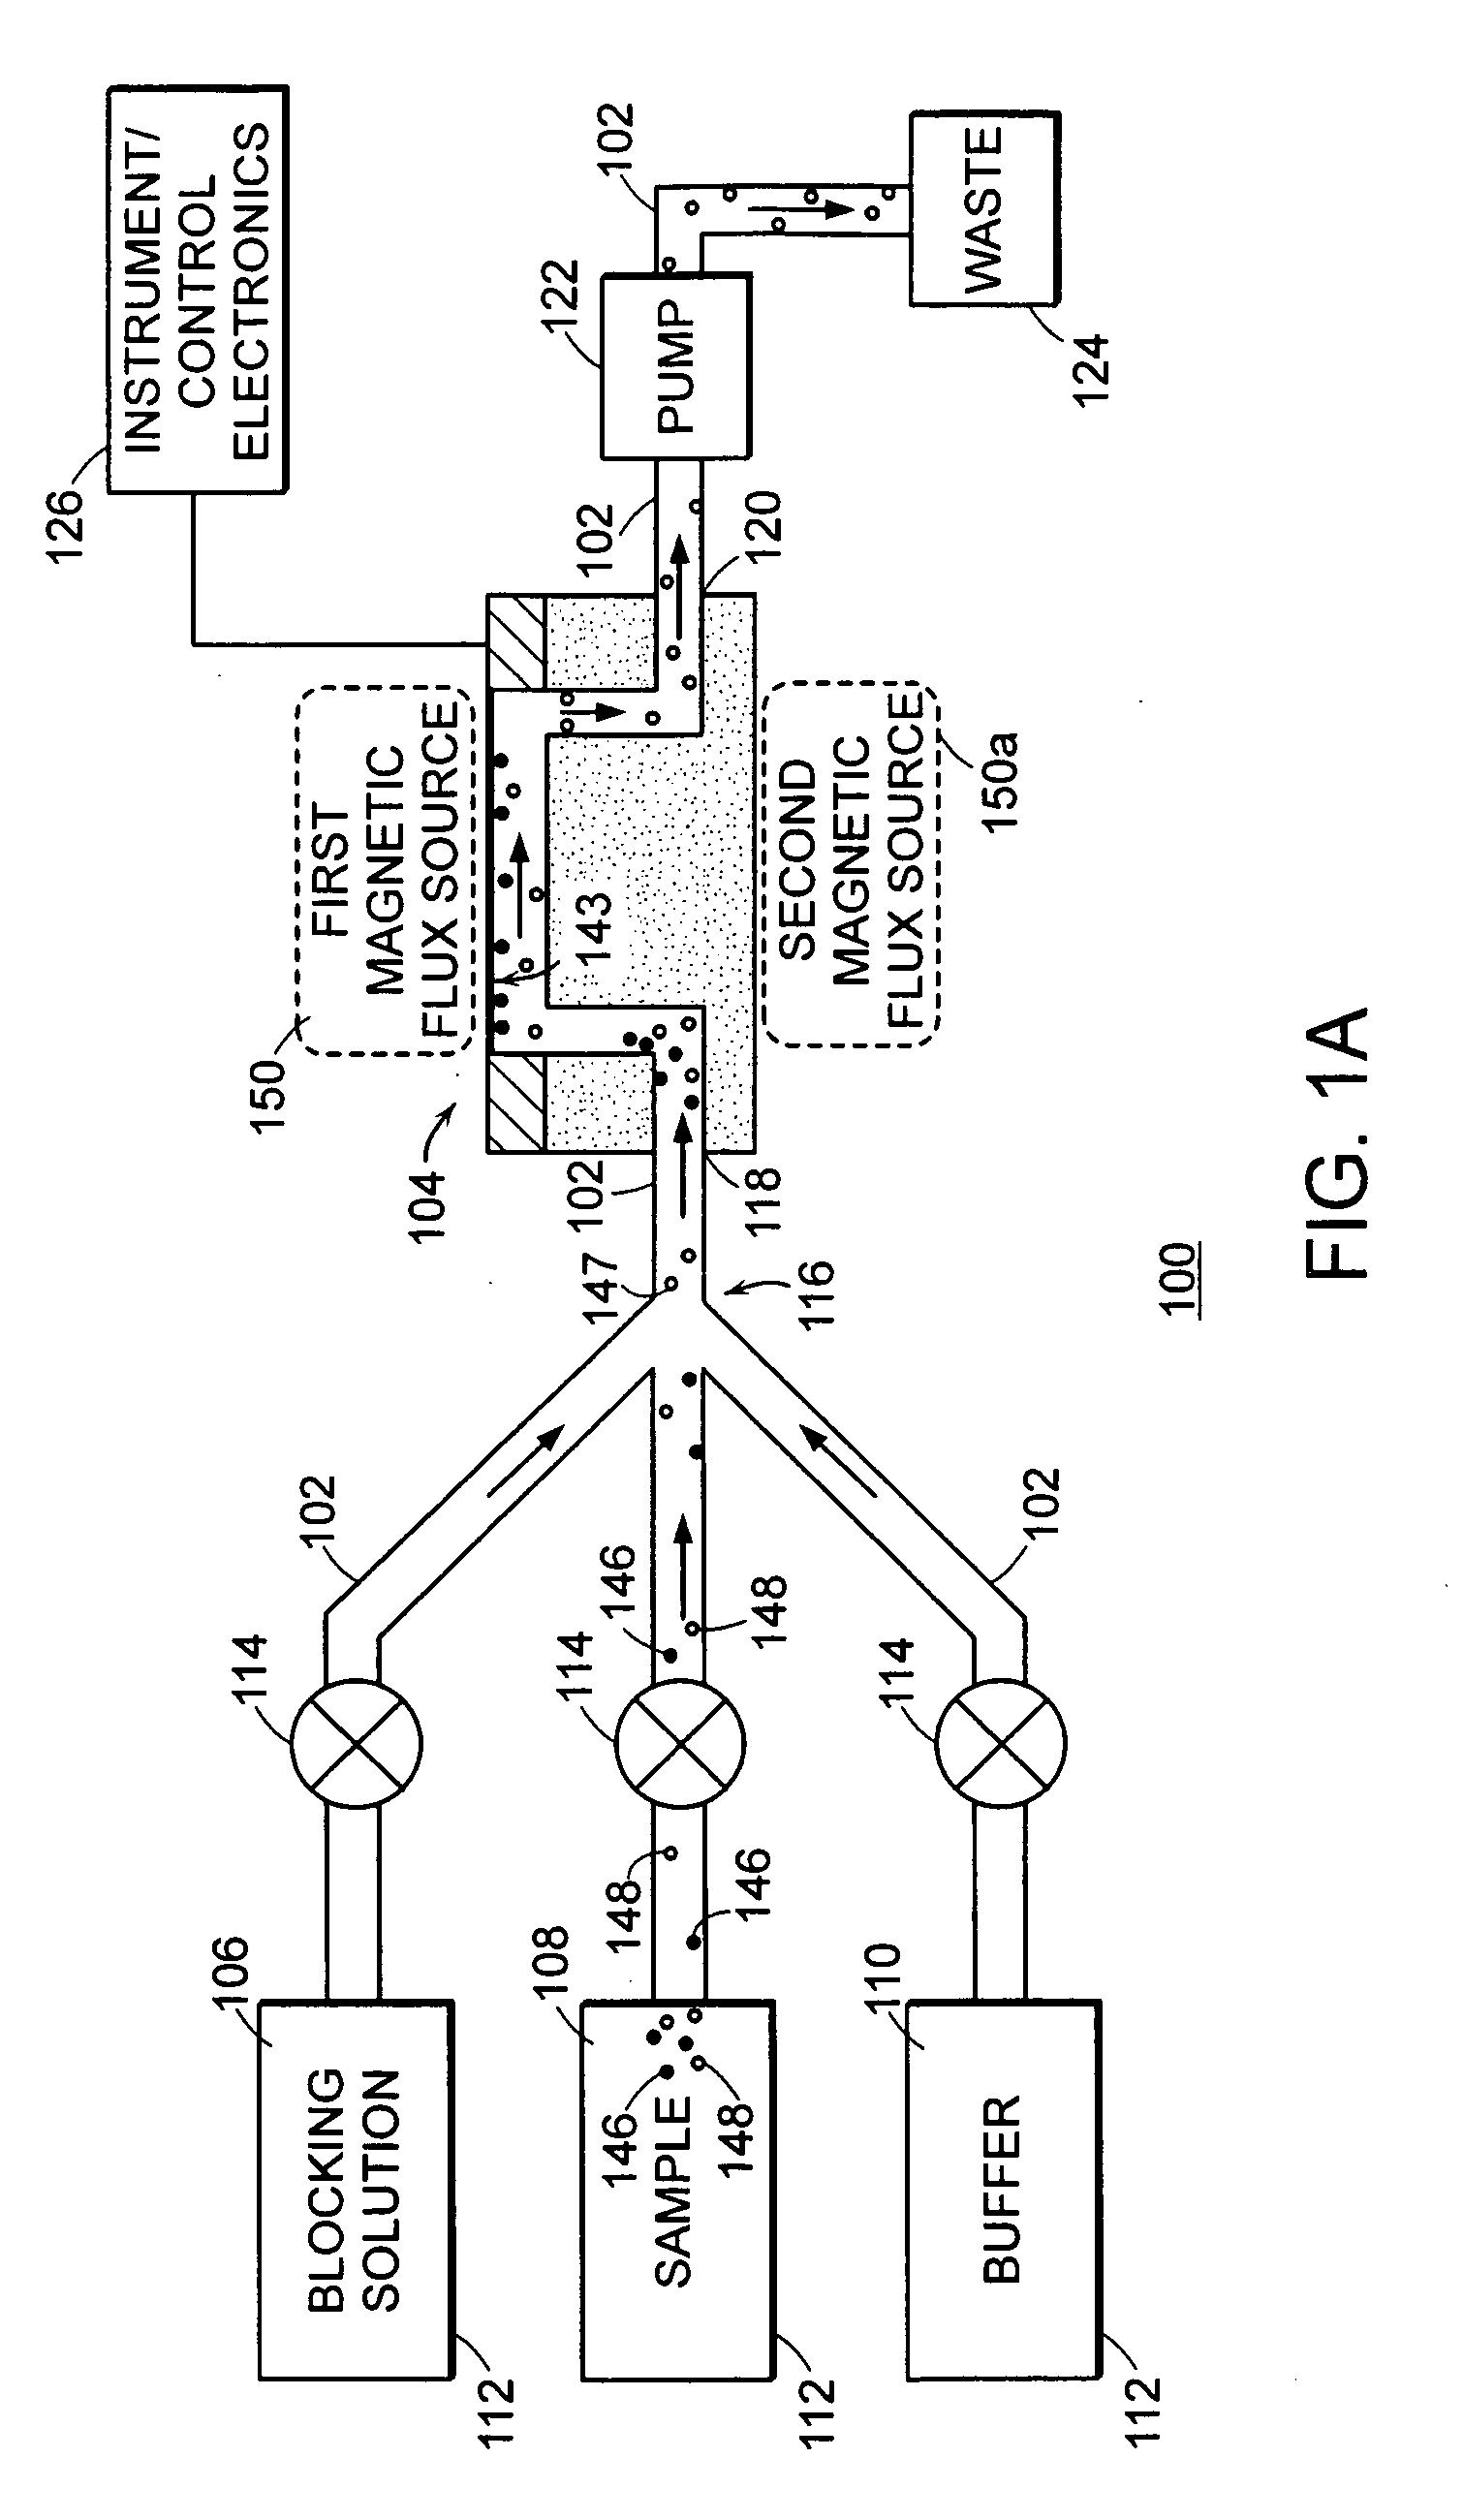 Method and apparatus for detection of analyte using an acoustic device